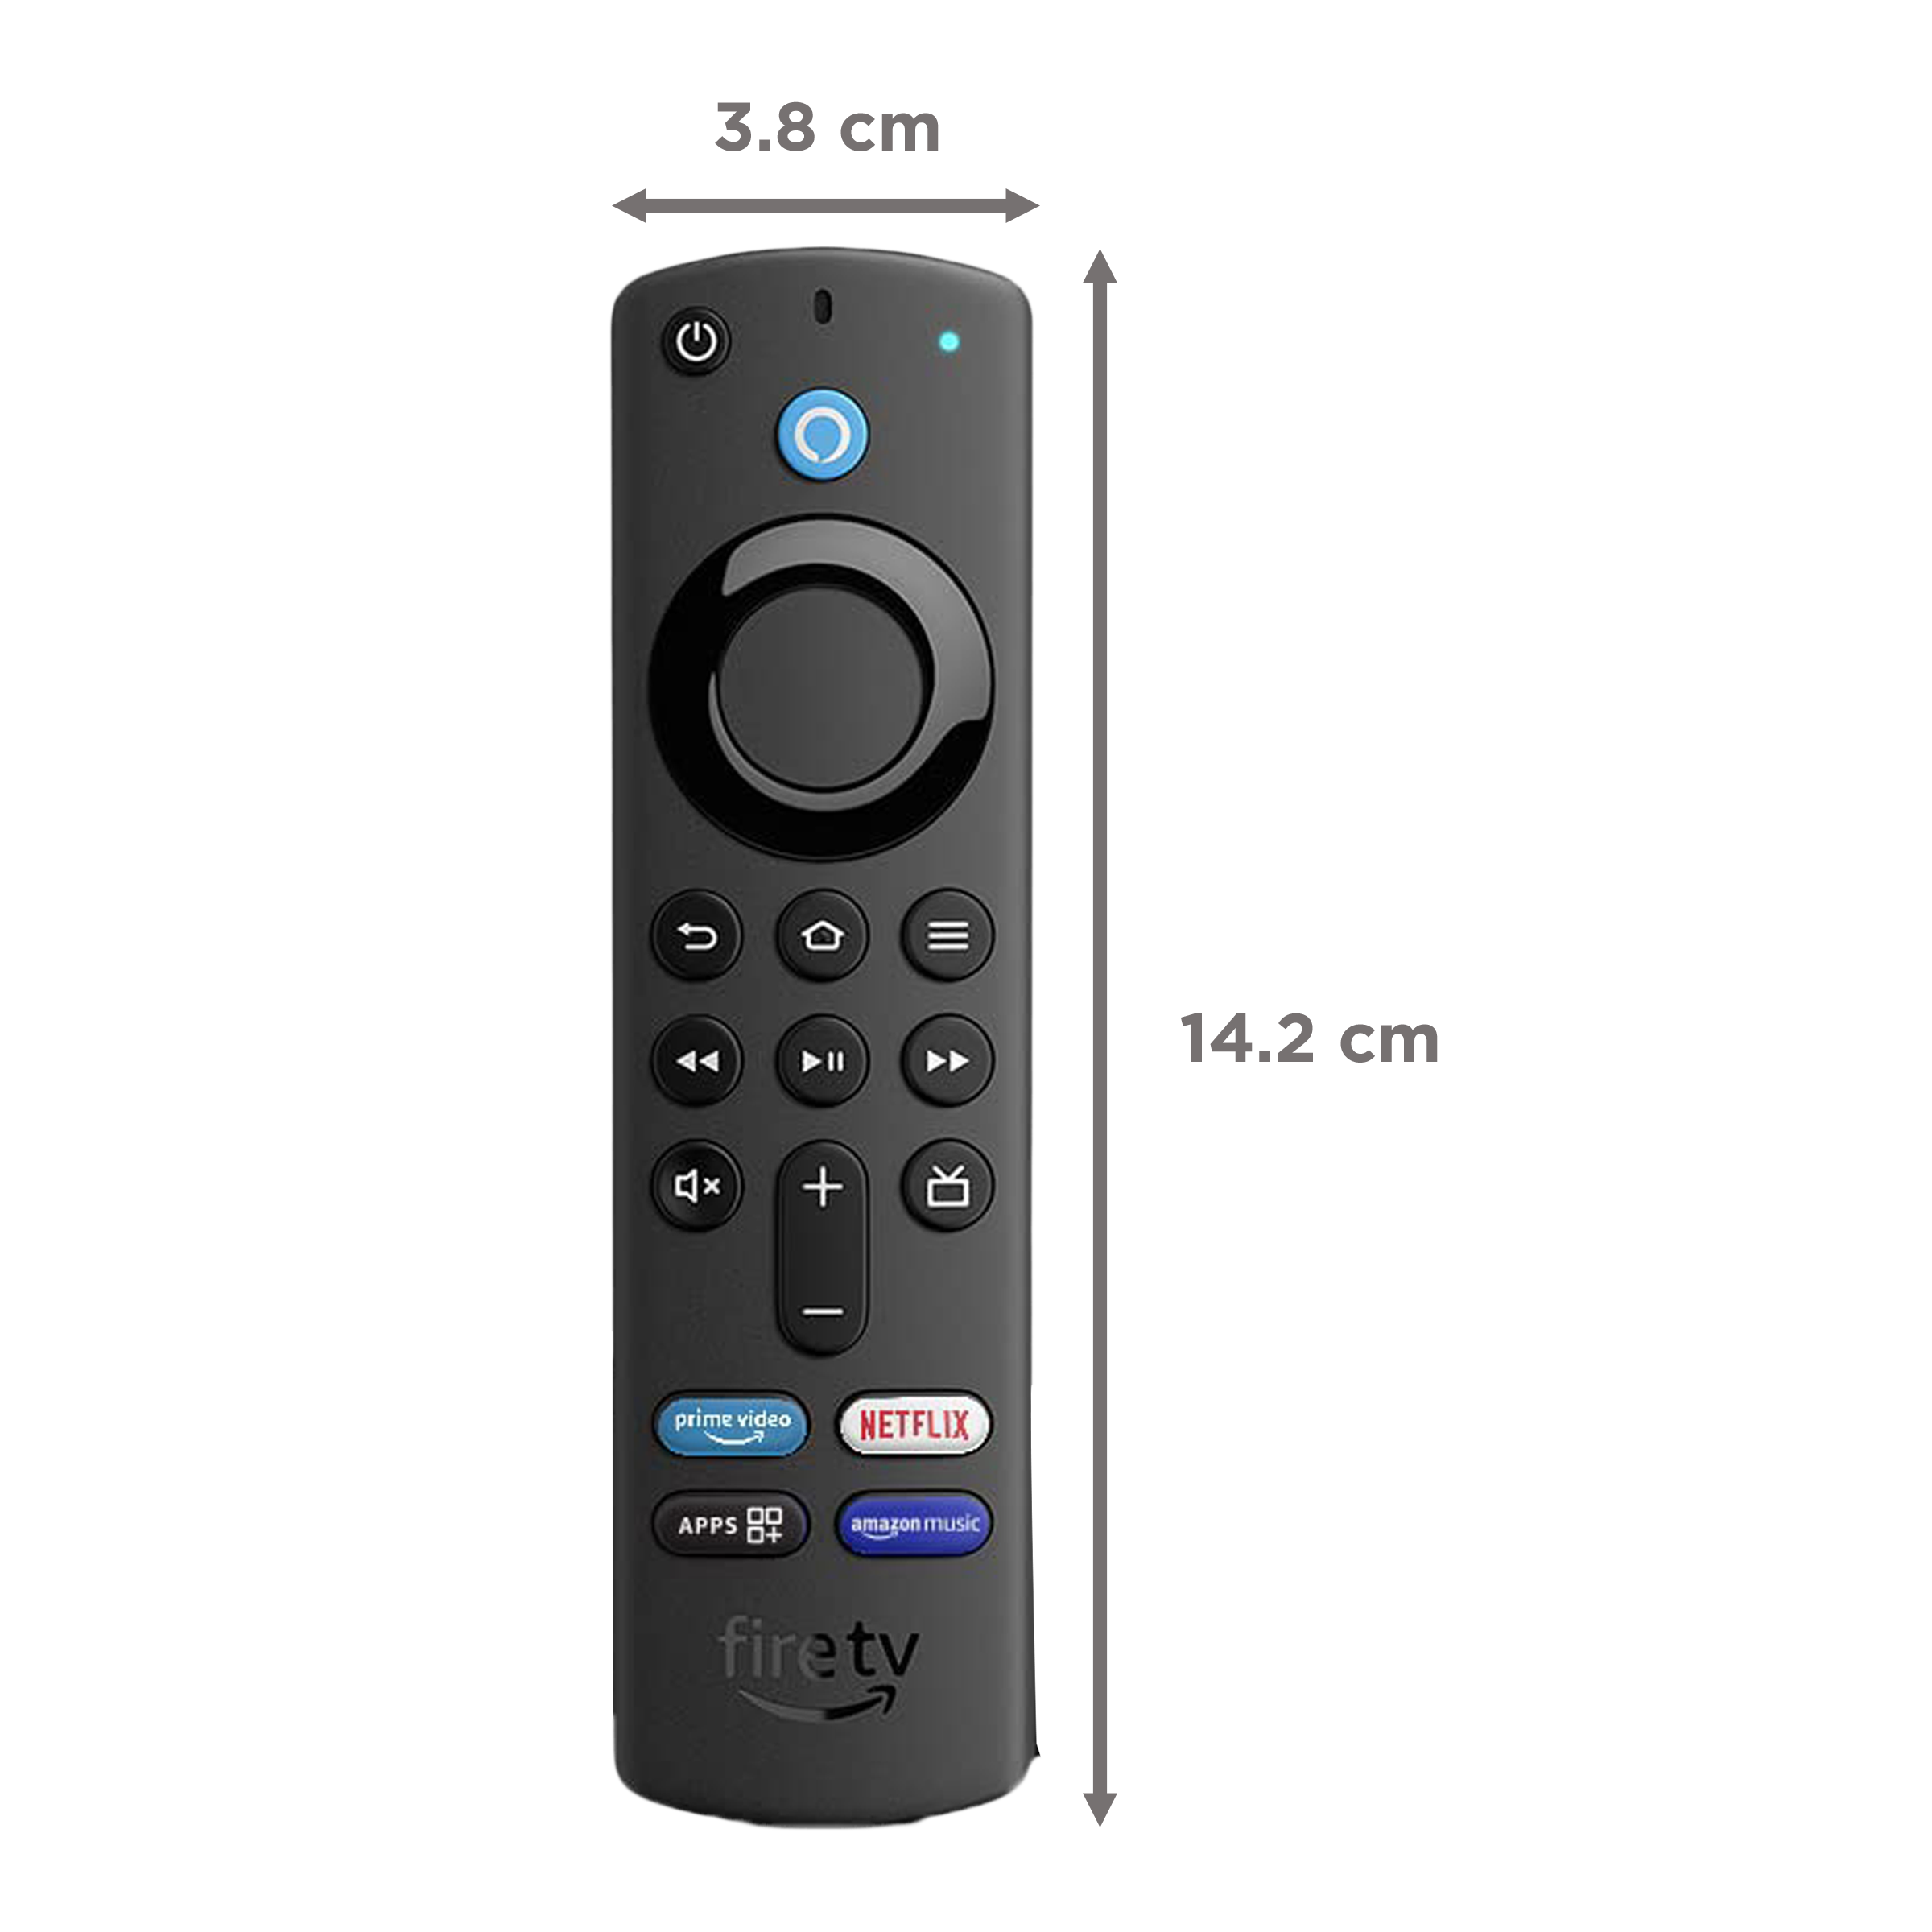 Buy Amazon Fire Tv Stick 4k With Alexa Voice Remote 3rd Gen Dolby Vision And Atmos Support